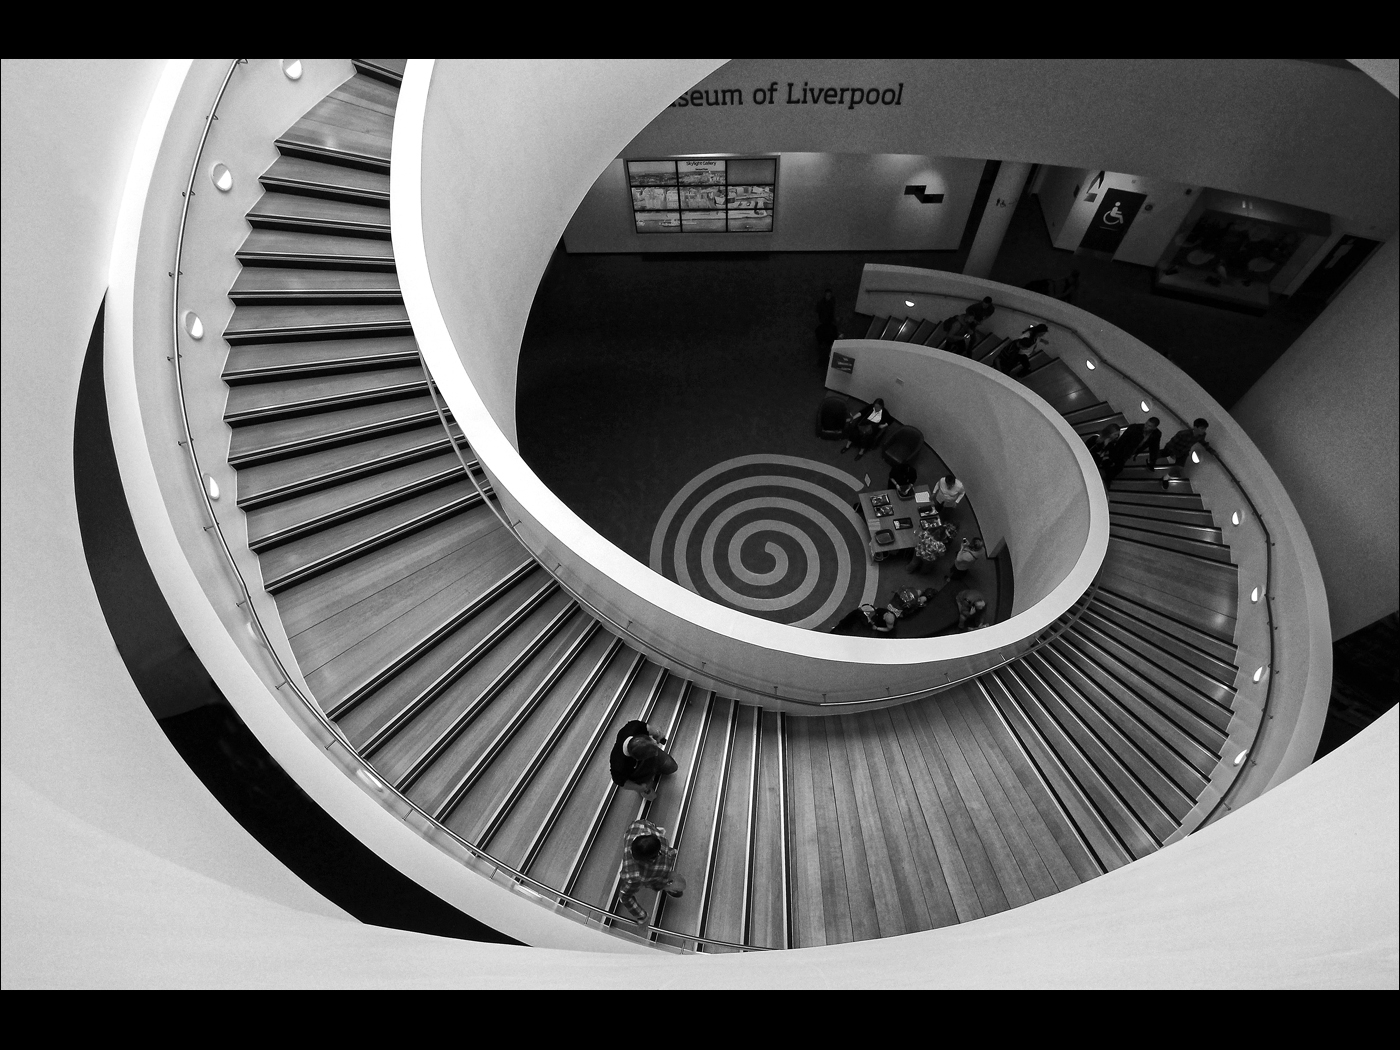 10_Anne-Marie Imeson_Stairway Museum of Liverpool